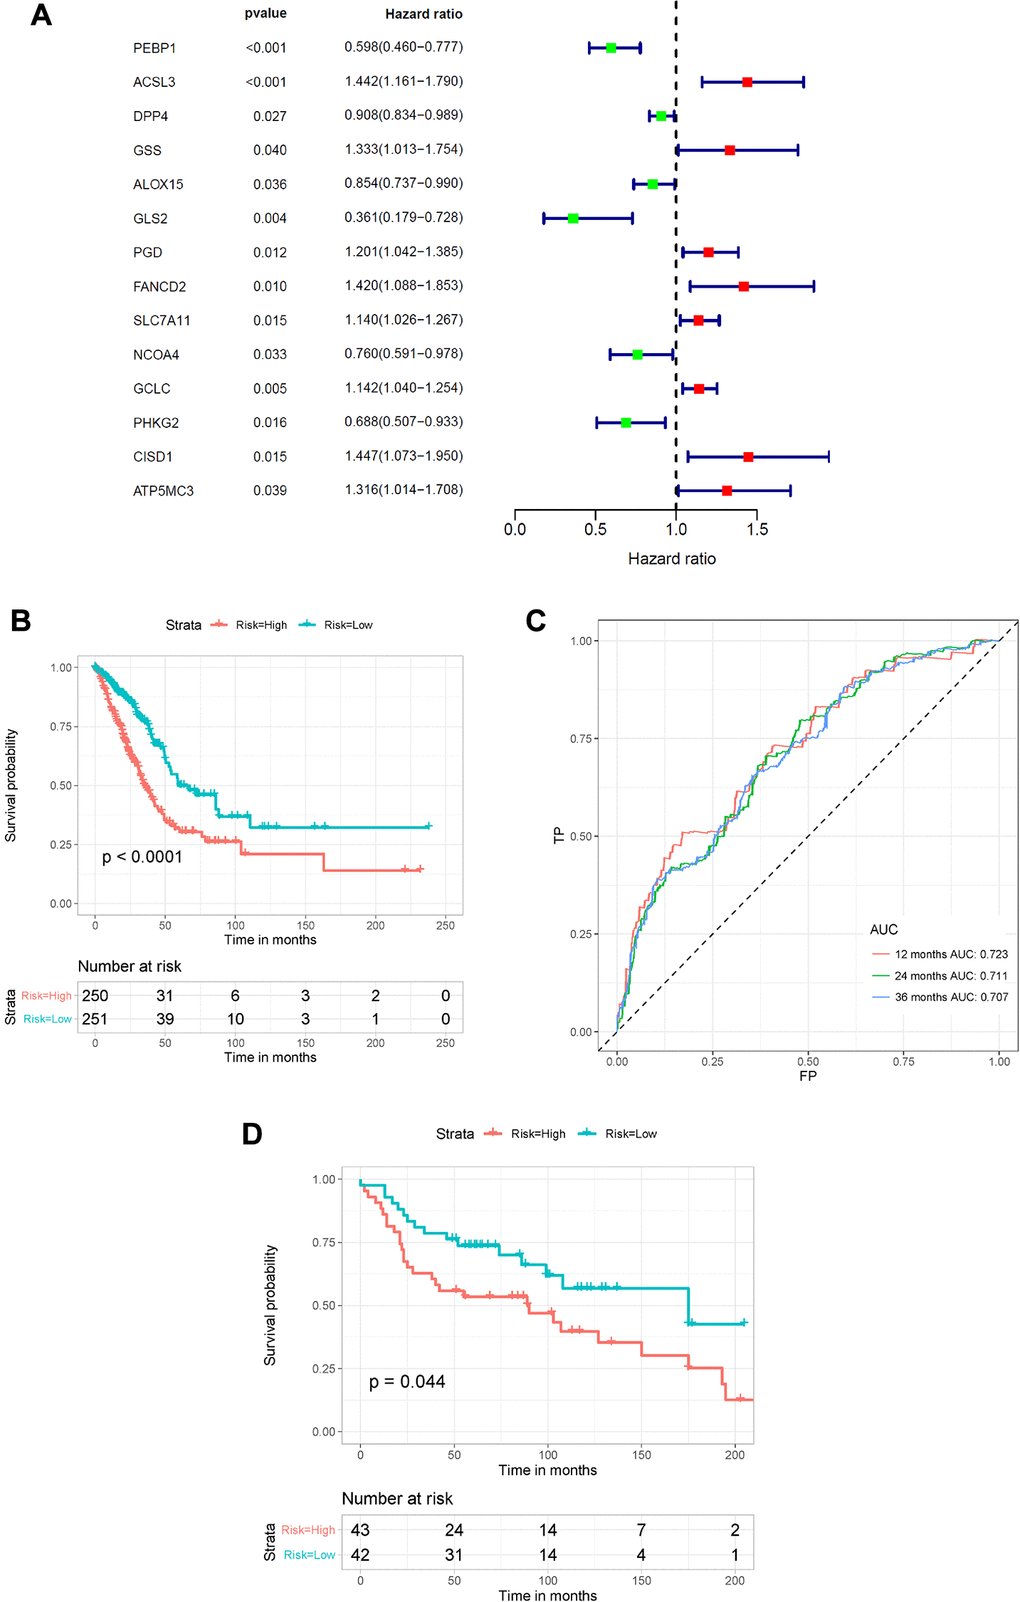 Construction of the FRG-based survival model for prognostic prediction of LUAD. (A) Univariate Cox regression analysis showing the hazard ratios (HRs) with 95% confidence intervals (CIs) and p values for 14 FRGs. (B) Kaplan–Meier survival curves showing the overall survival of high- and low-risk LUAD patients divided according to the risk score calculated using the new survival model based on the expression of 5 FRGs. (C) ROC curve analysis showing the prognostic prediction efficiency of the new survival model. (D) Kaplan–Meier survival curves analysis of the GSE30219 cohort.